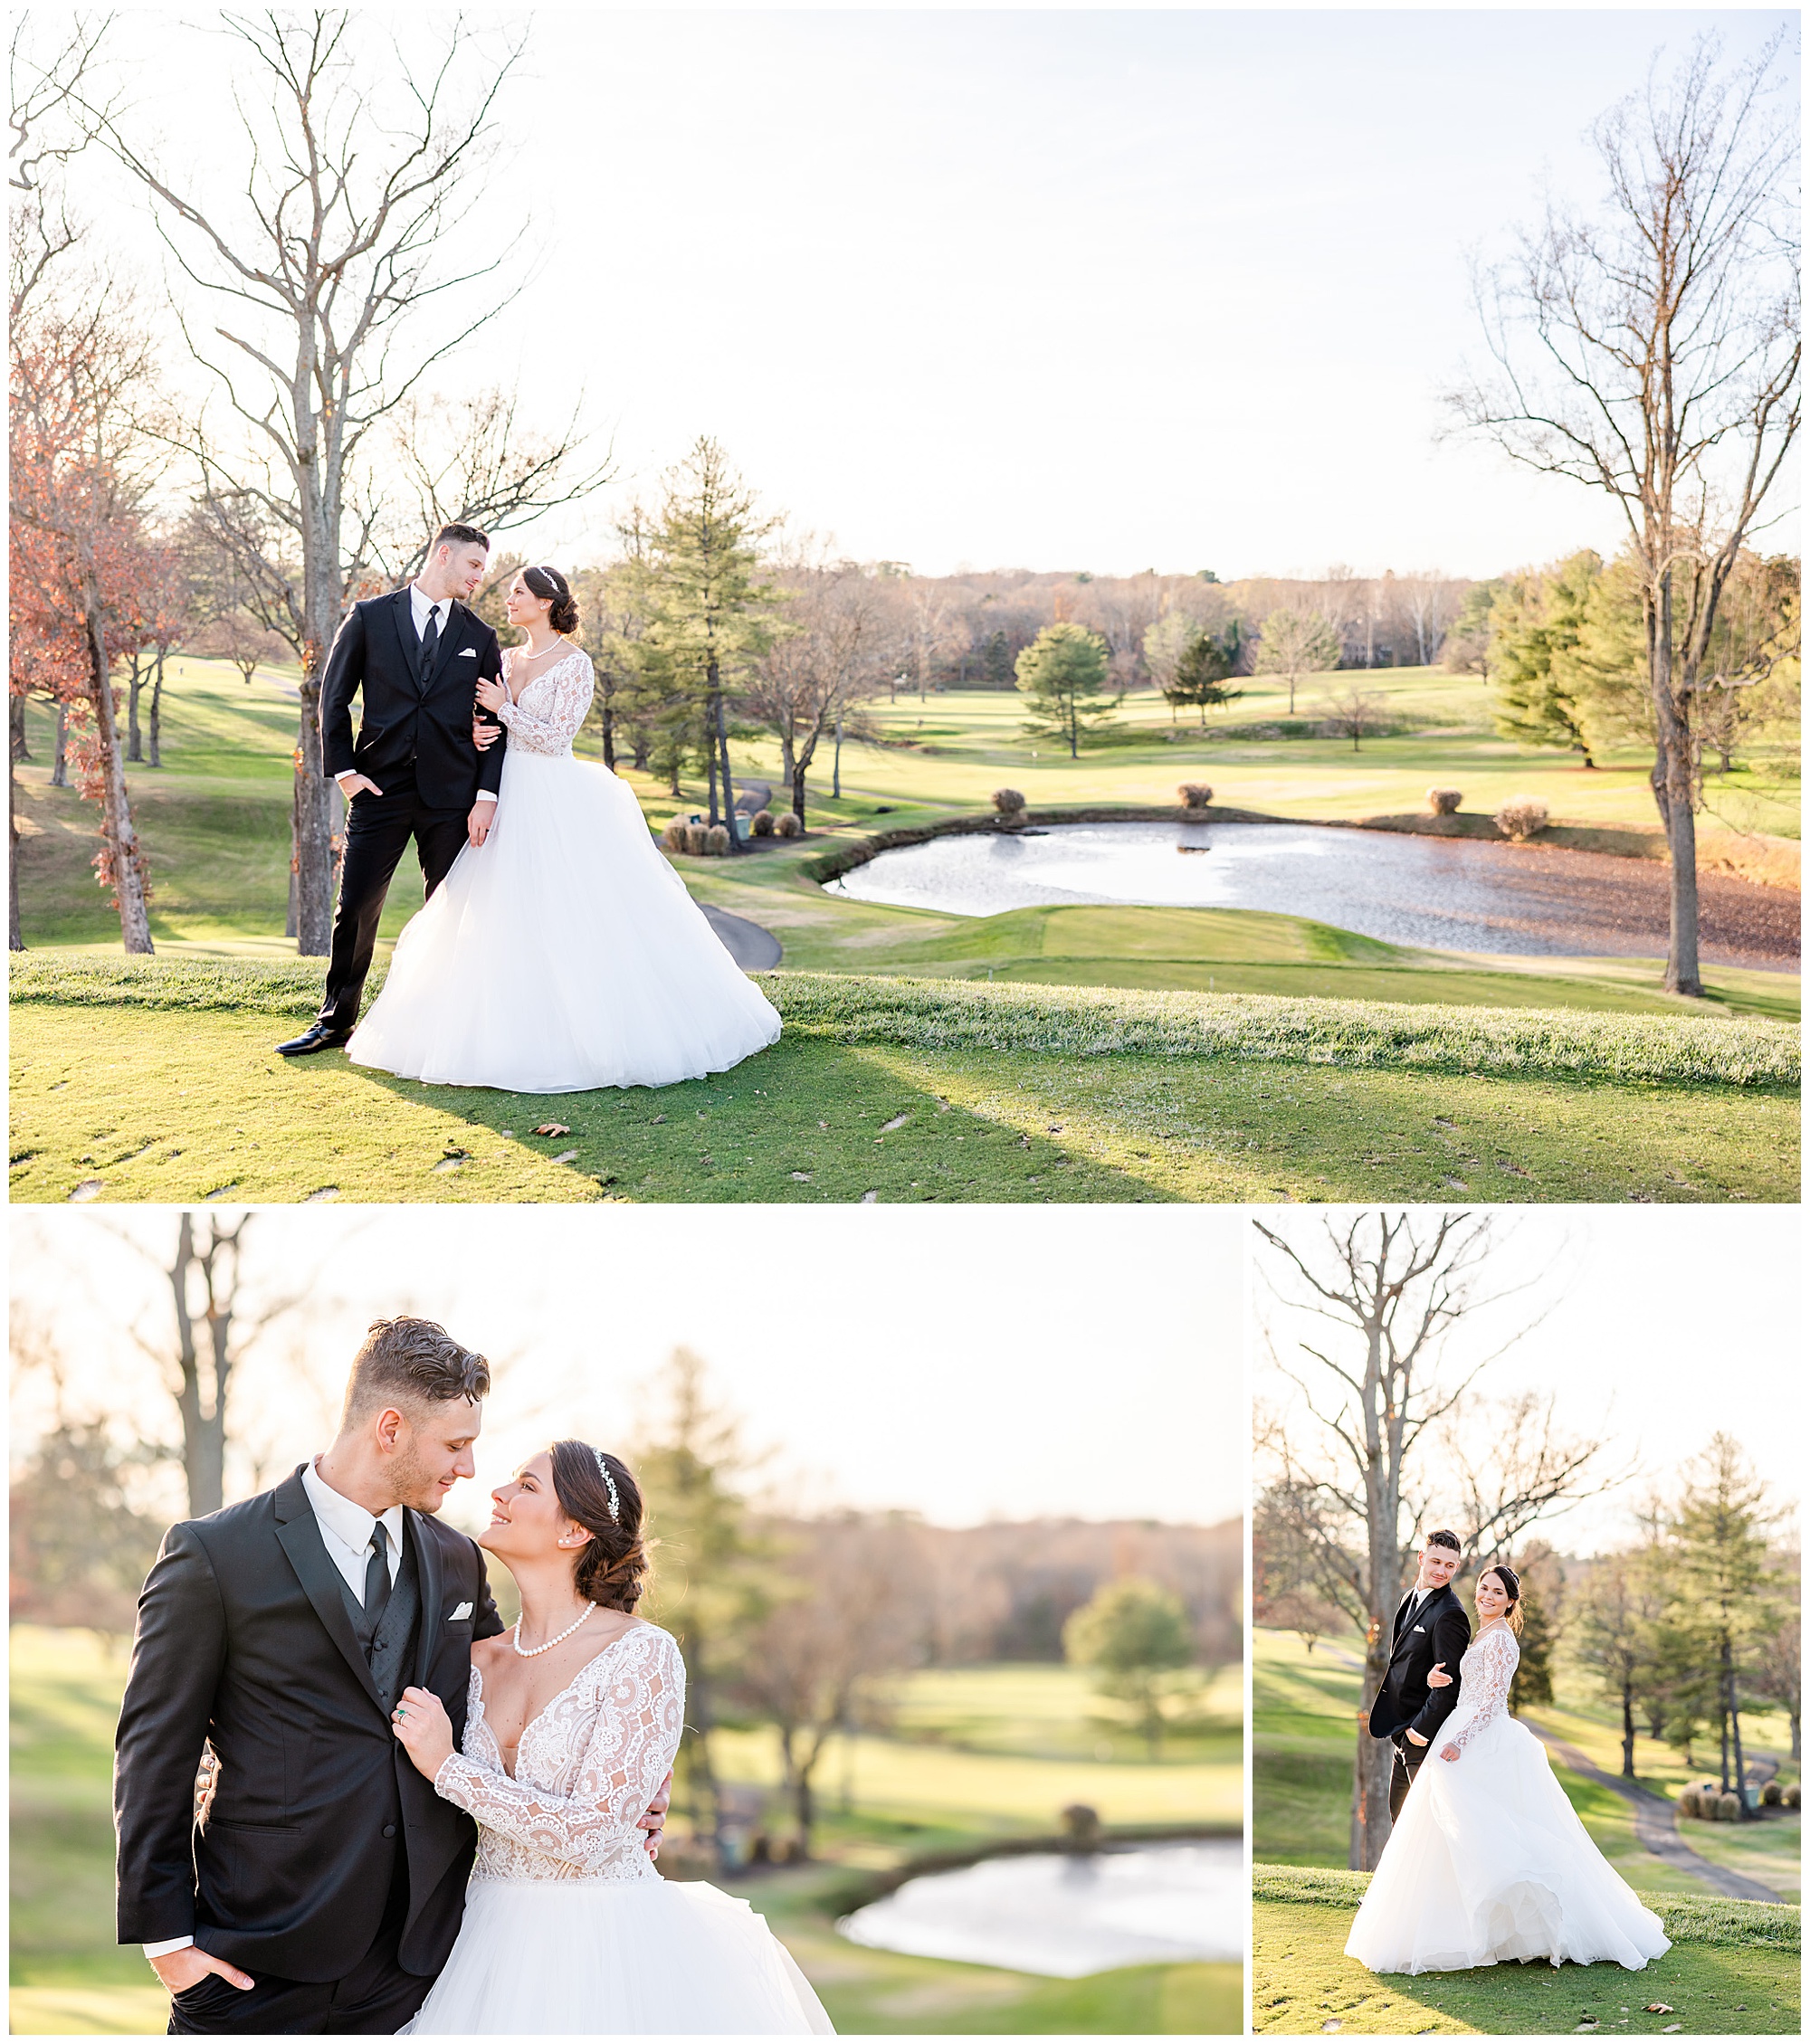 royal inspired Country Club of Fairfax wedding, Fairfax VA photographer, country club wedding, DC area country club, DC country club wedding, DC wedding photography, northern Virginia wedding photography,DC wedding photographer, golf course wedding, winter wedding, royals inspired wedding, Rachel E.H. Photography, couple gazing at each other, couple linking arms, couple in front of pond